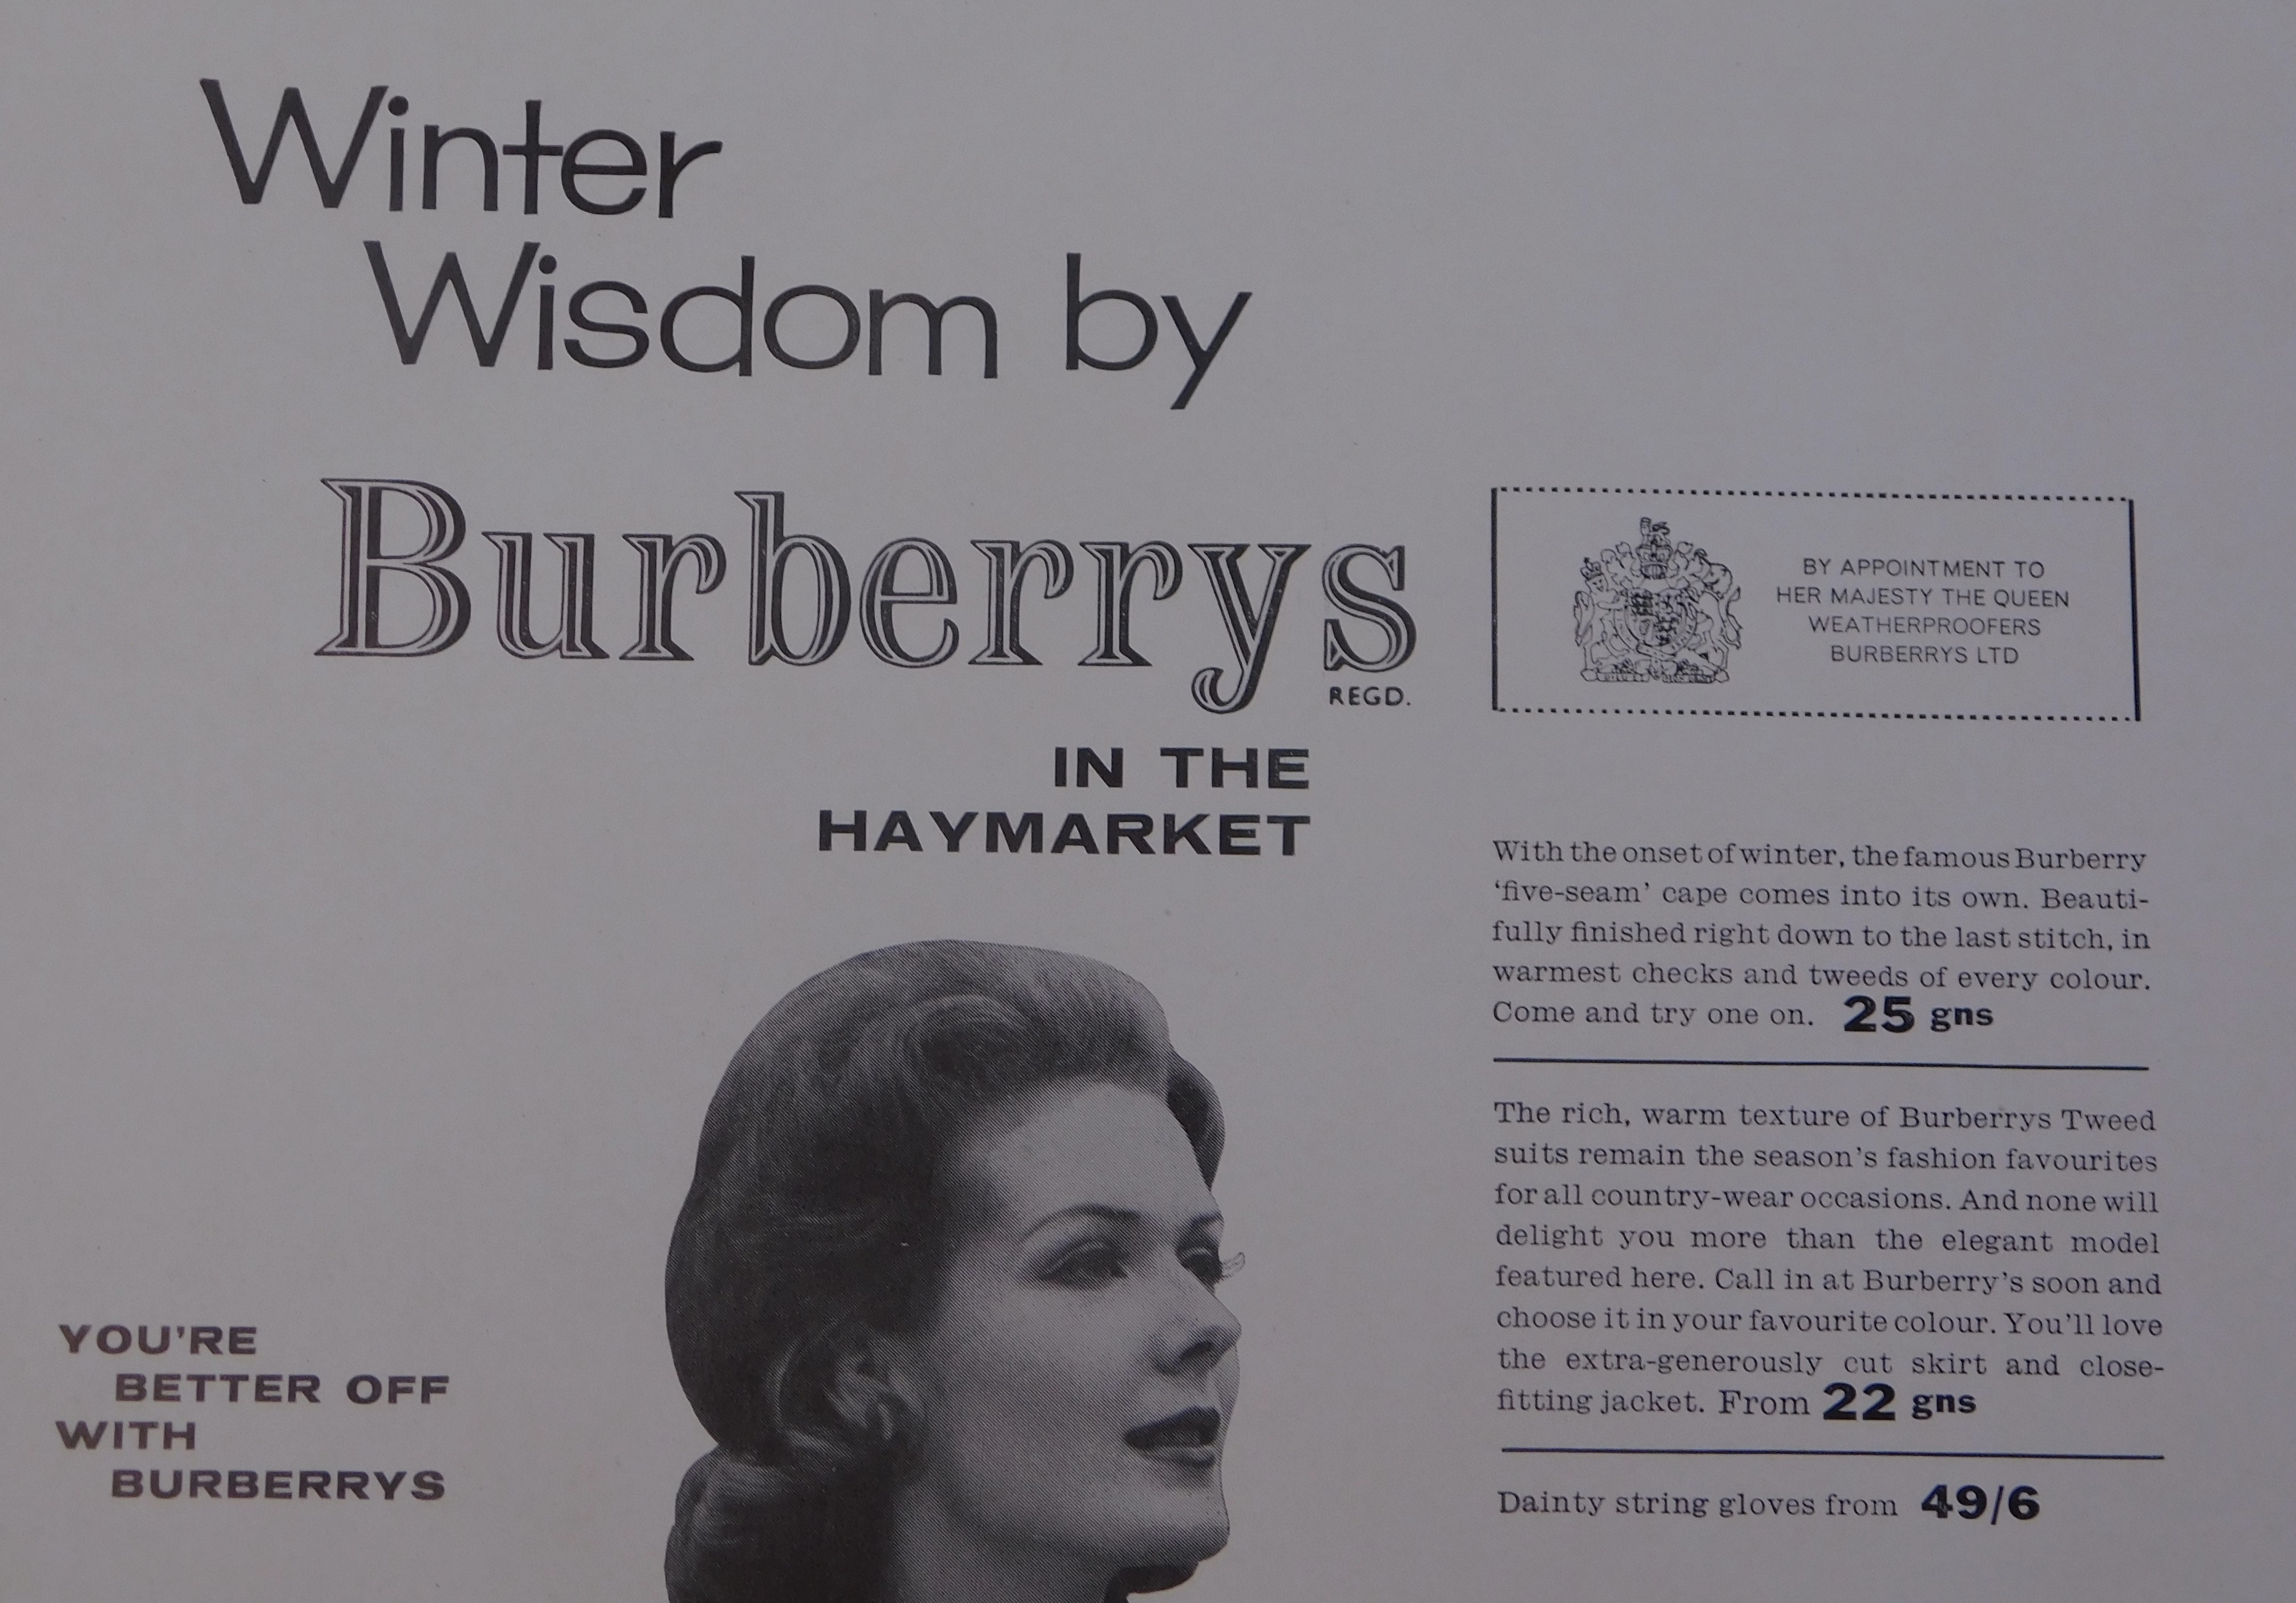 Burberrys 1959 - Full page black and white advertisement 'Winter Wisdom by Burberry's at the - Image 5 of 5